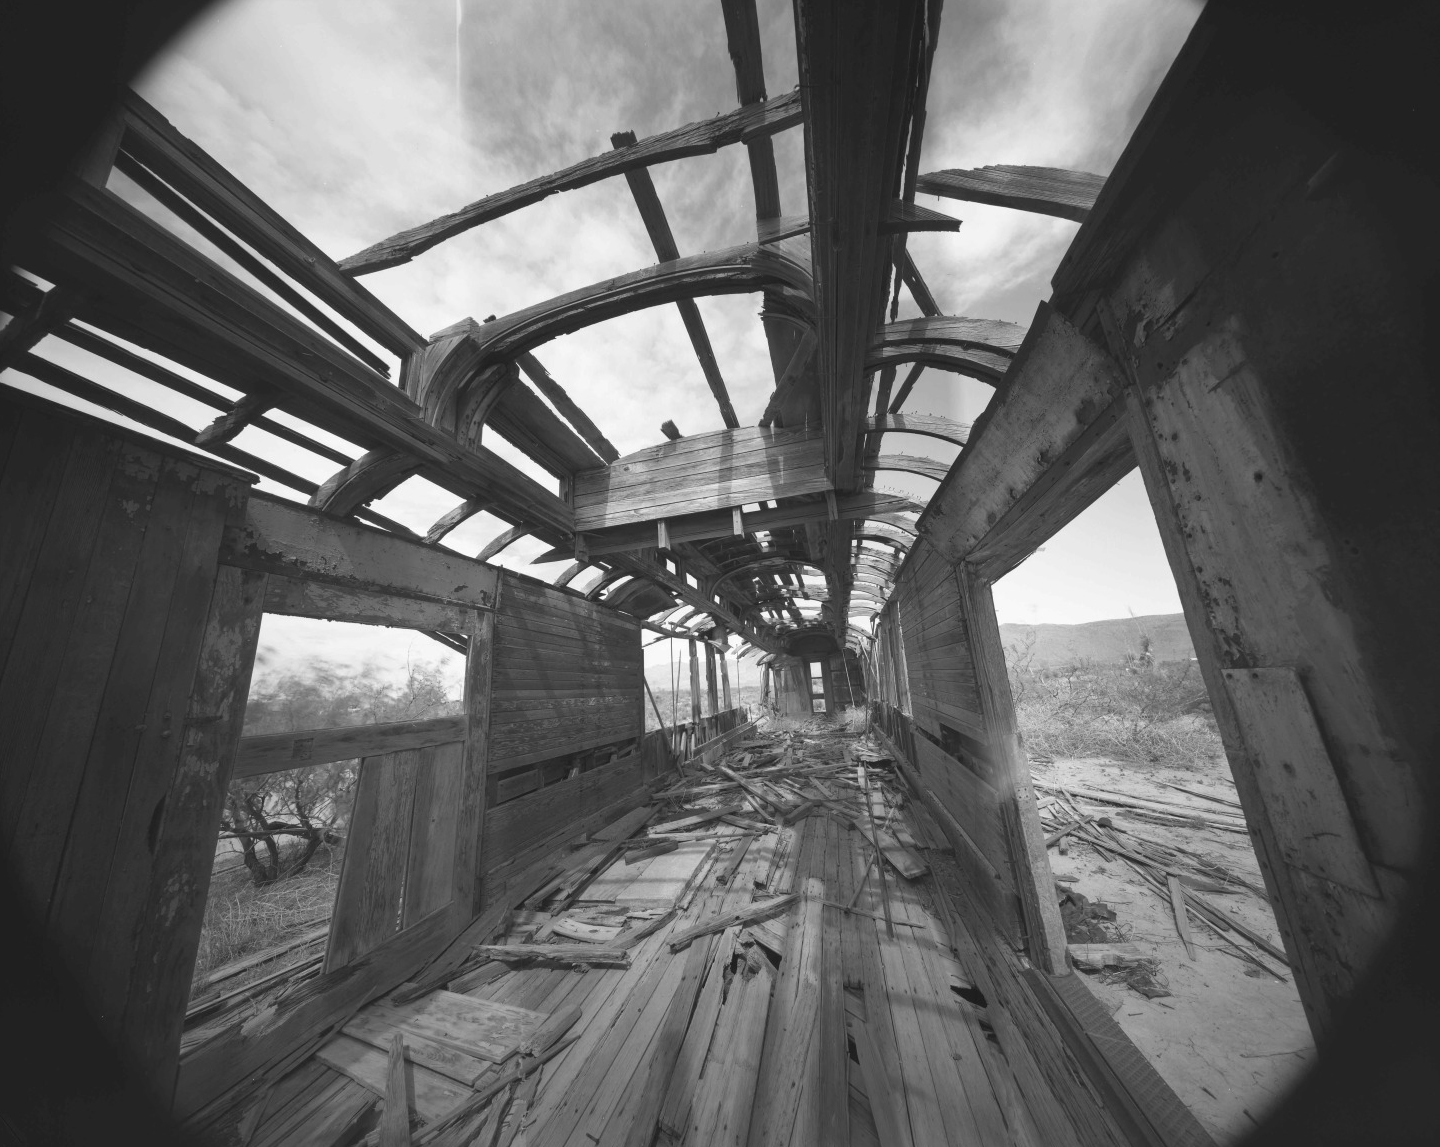 Jay Dusard, Abandoned Railway Coach Car, Rodeo, New Mexico (Vagón de pasajeros de ferrocarril abandonado, Rodeo, Nuevo México), 2010. Photograph (archival pigment print). Museum purchase with funds provided by Judith Regnier and Stanley Getch, Ginger K. Renner Western purchase fund and Men's Arts Council.